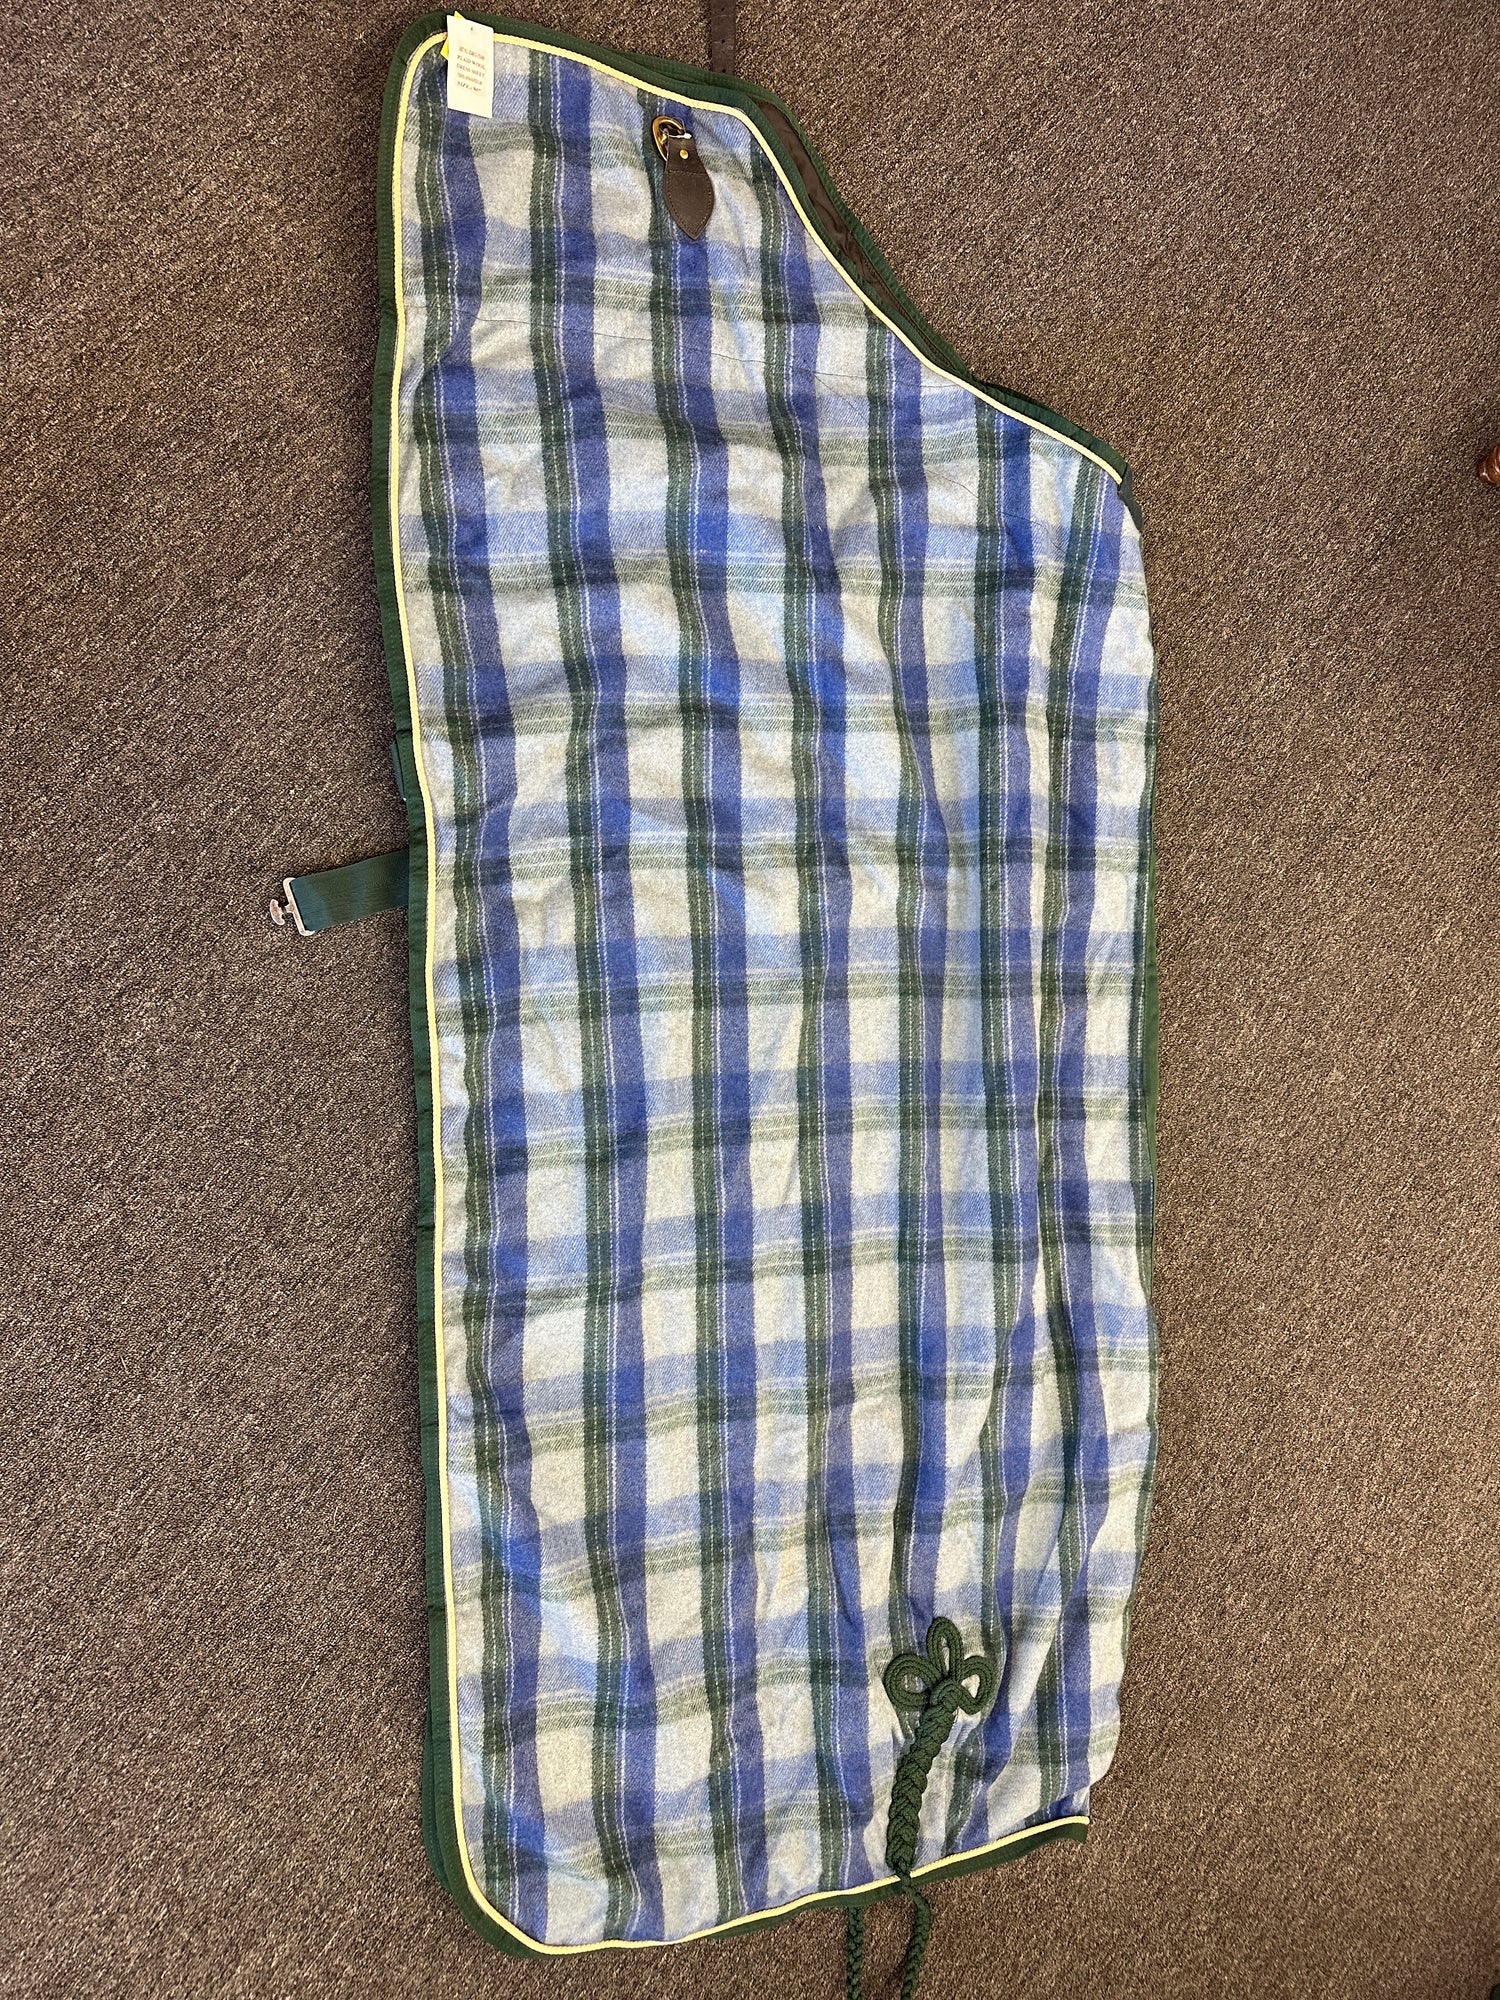 Wool Cooler in Blues & Green trim Size 80